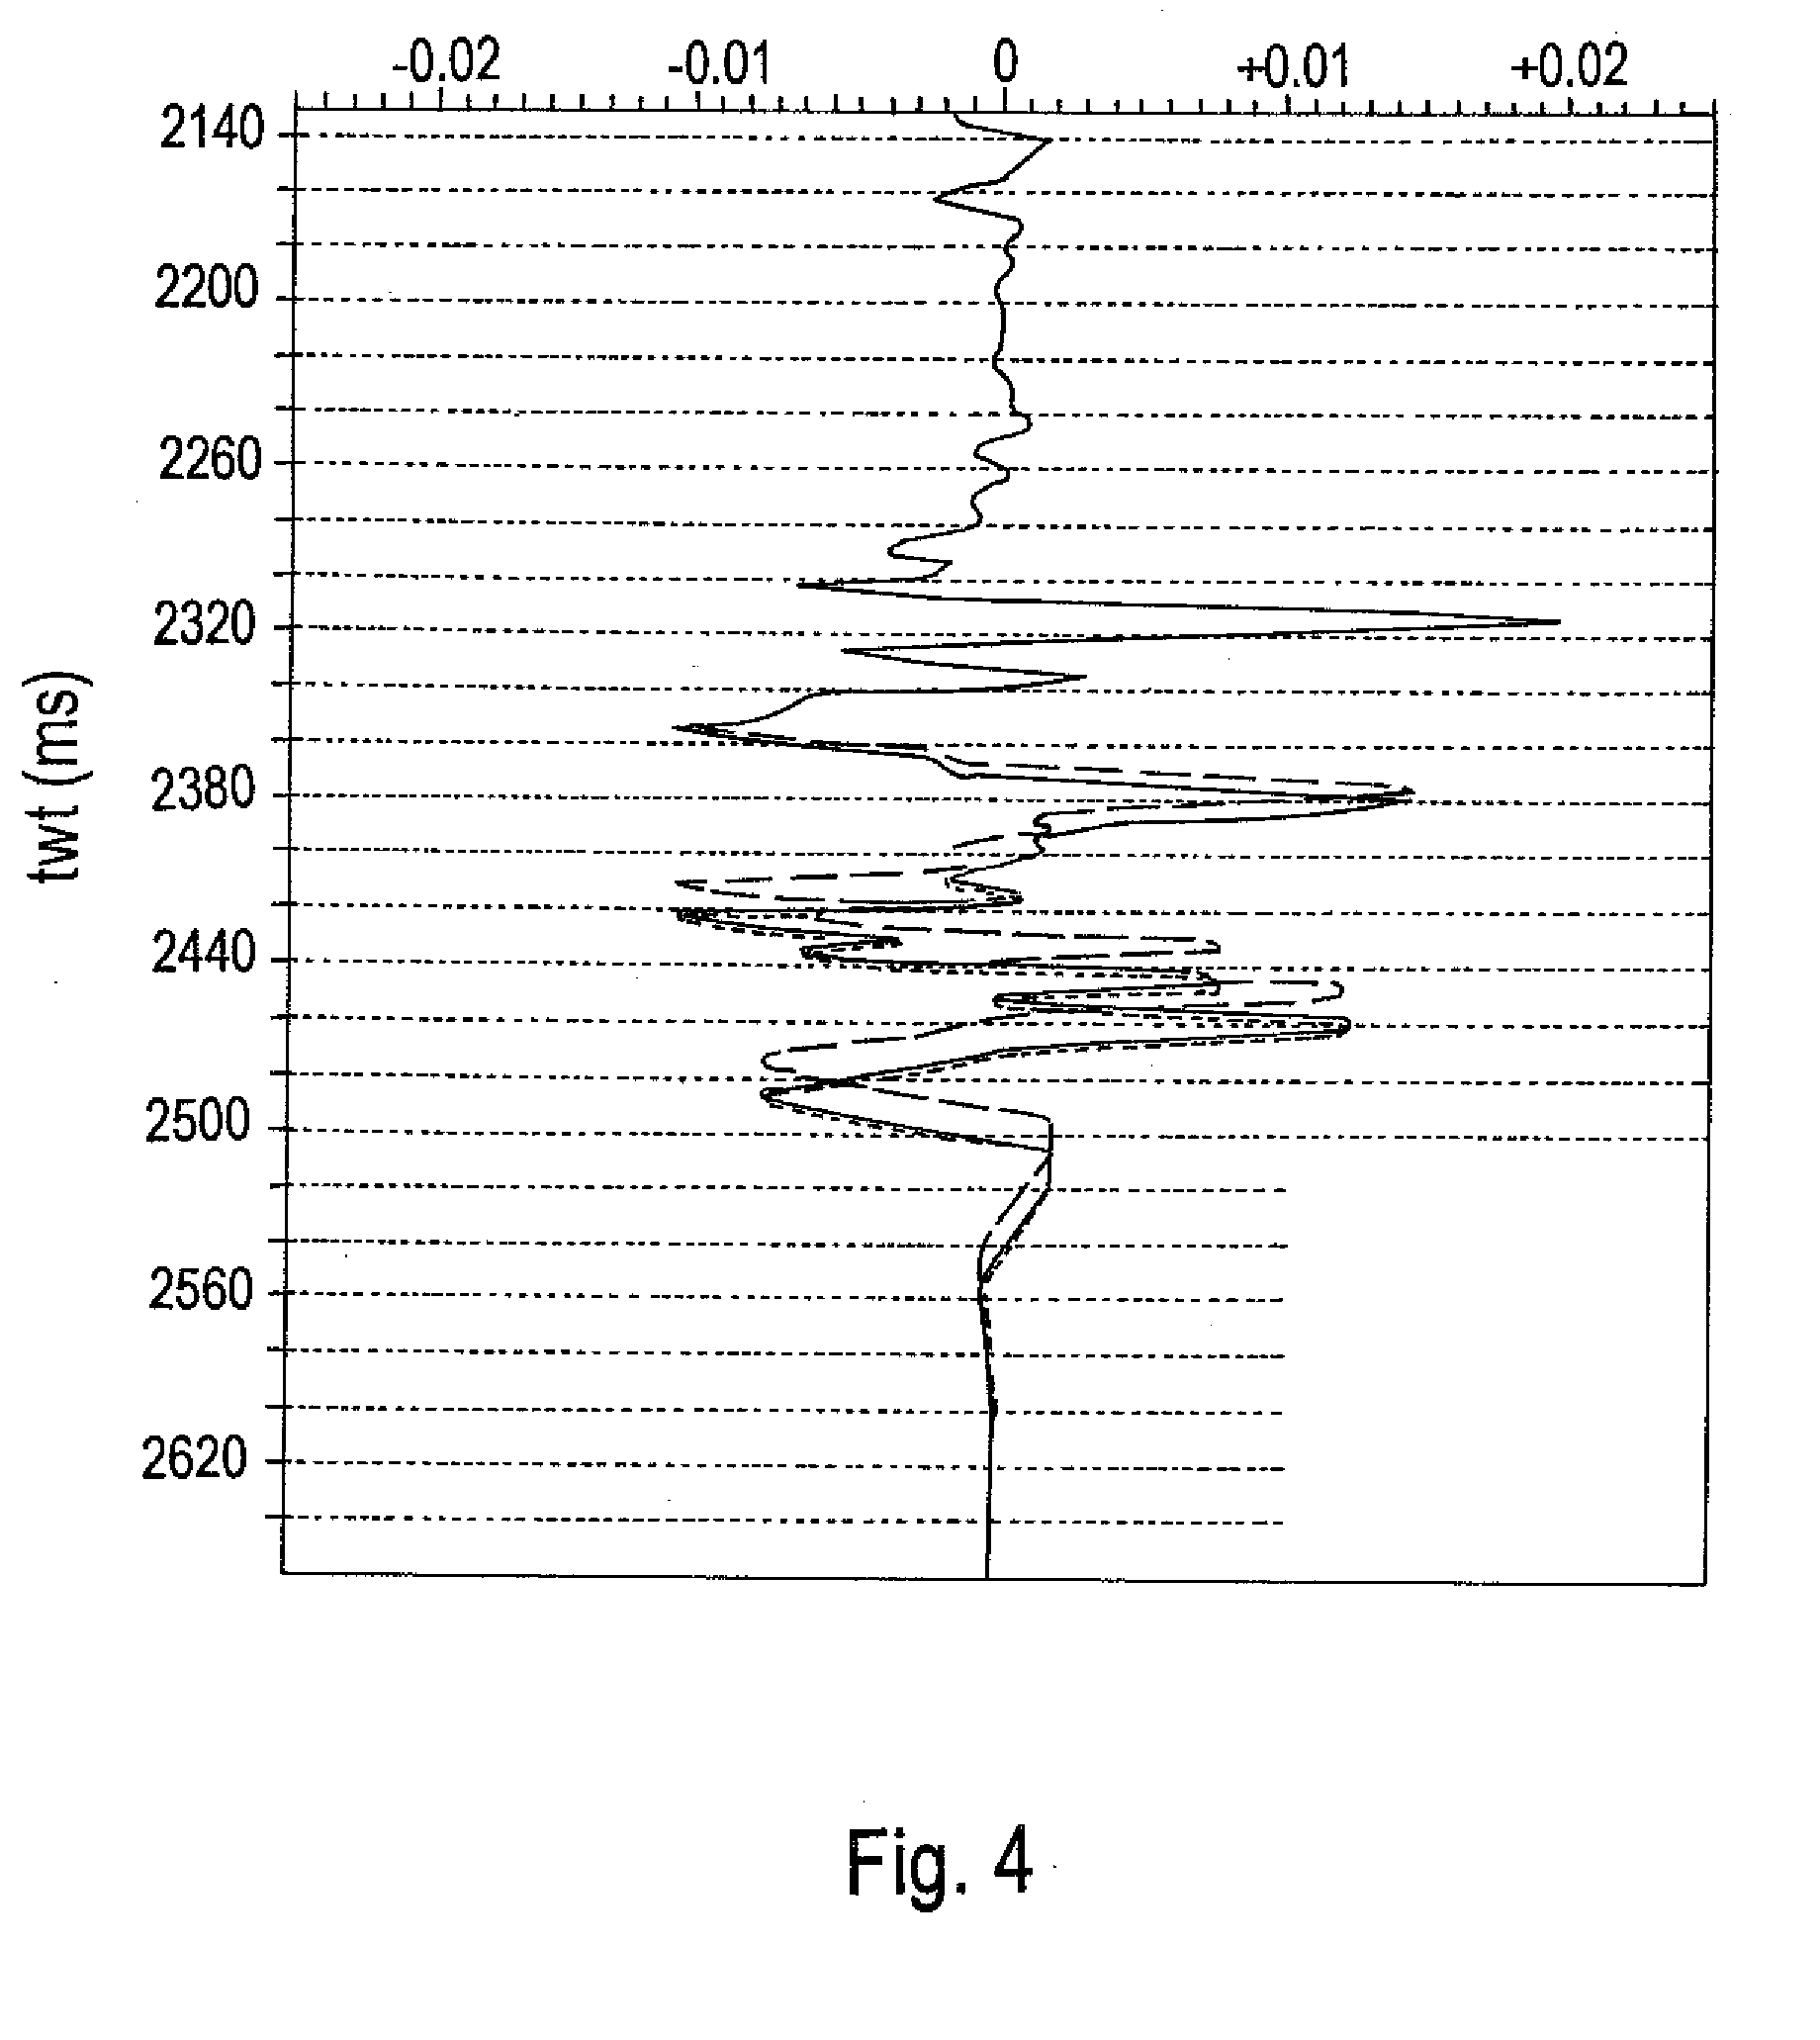 Method of Joint Inversion of Seismic Data Represented on Different Time Scales